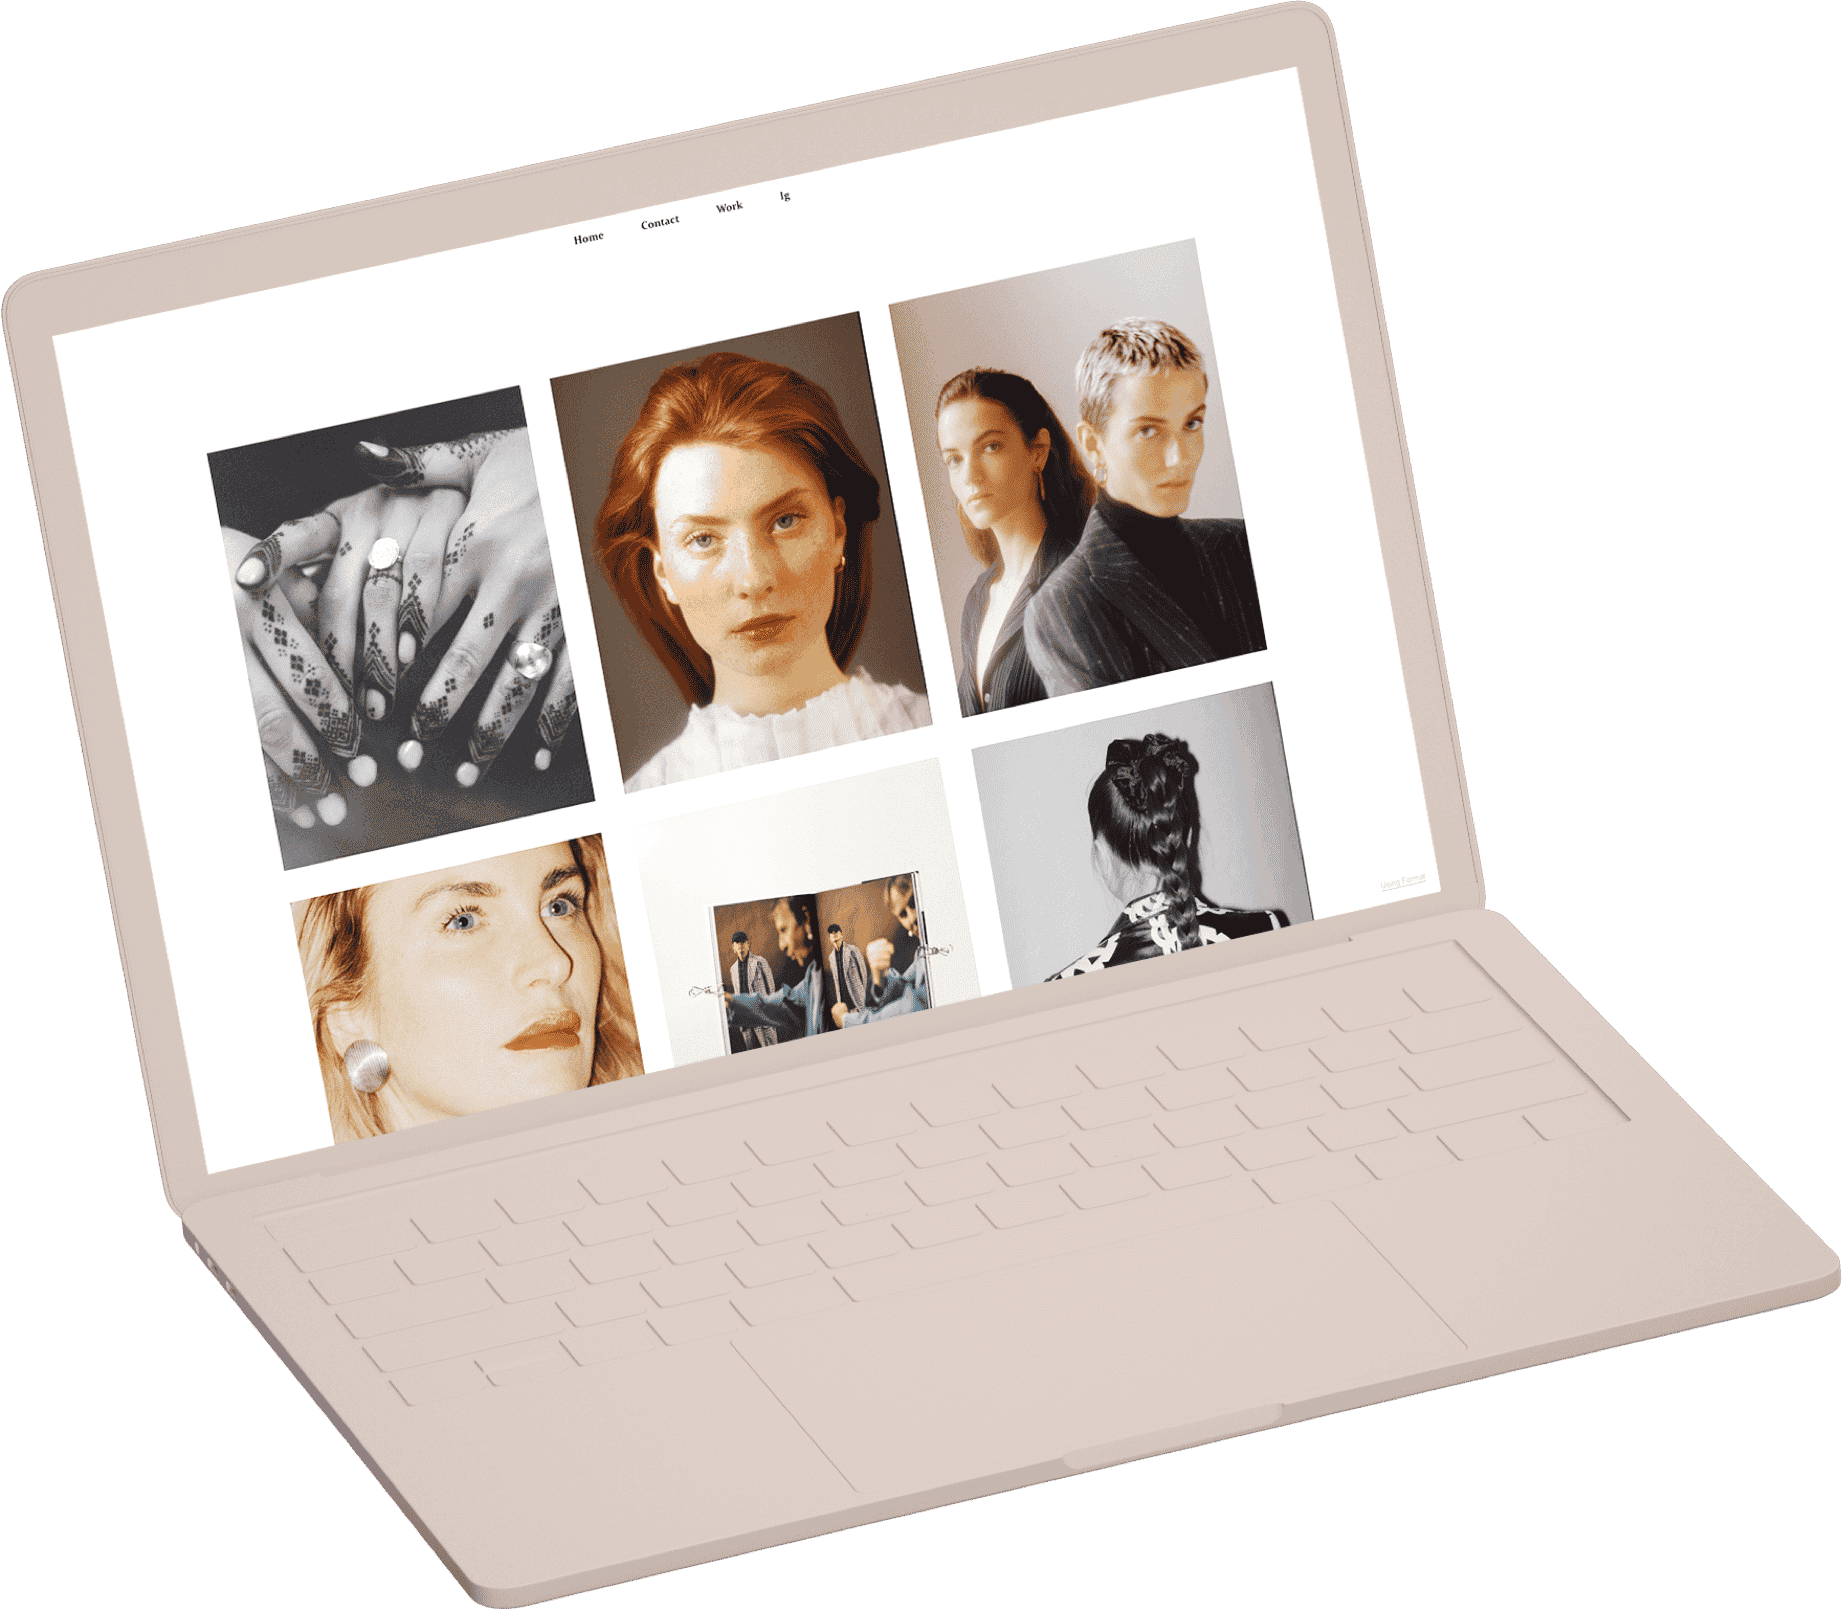 How to Make a Photography Website in 2022